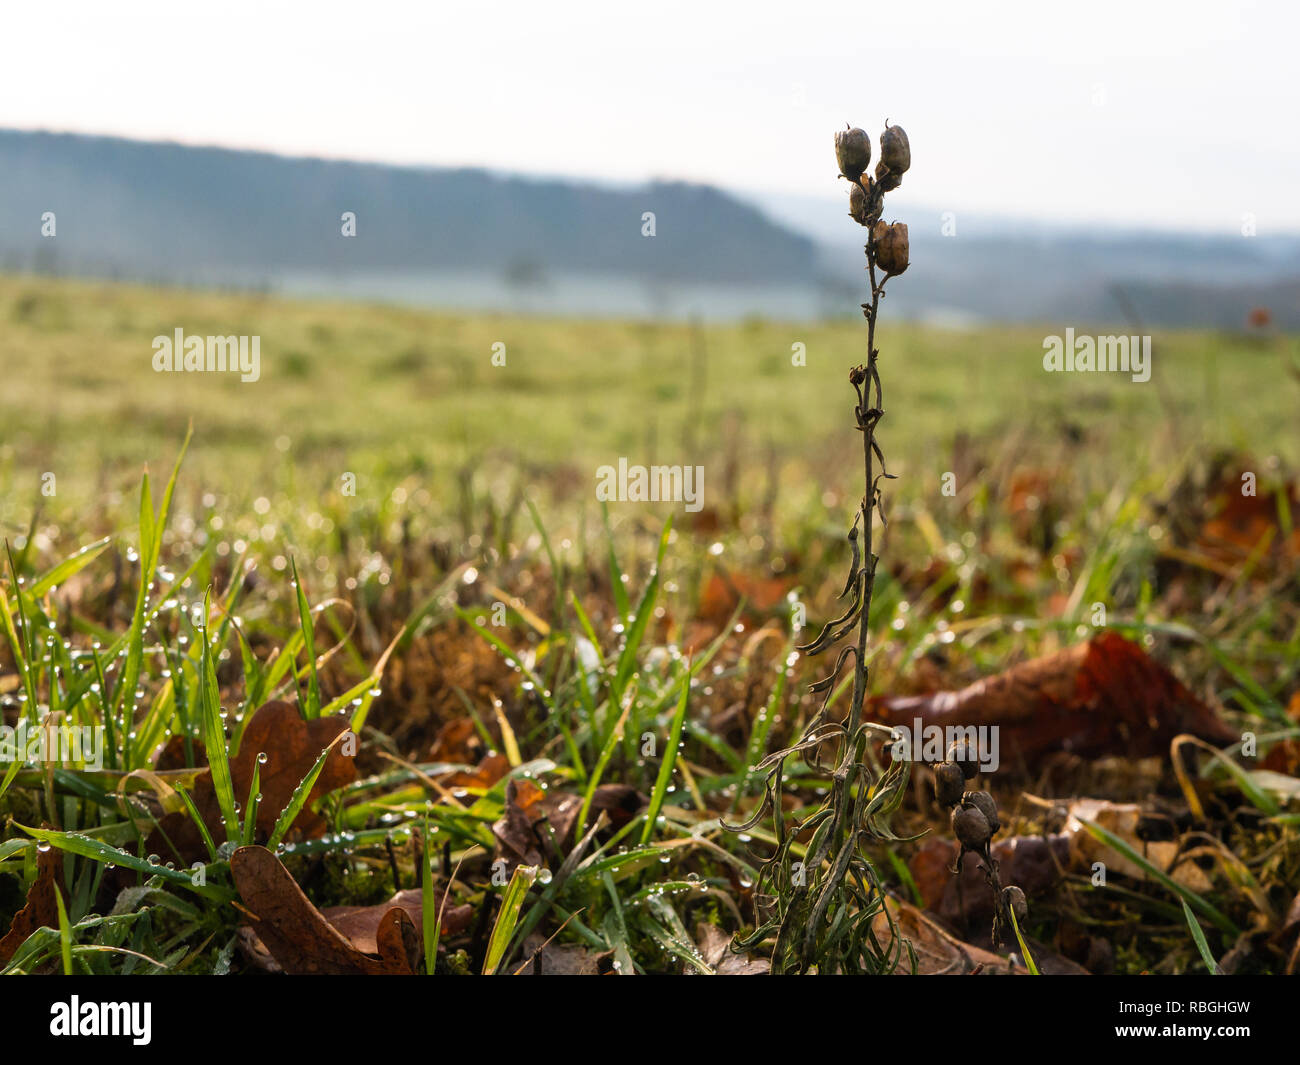 Rural autumn meadow with dew on grass and single plant in foreground Stock Photo